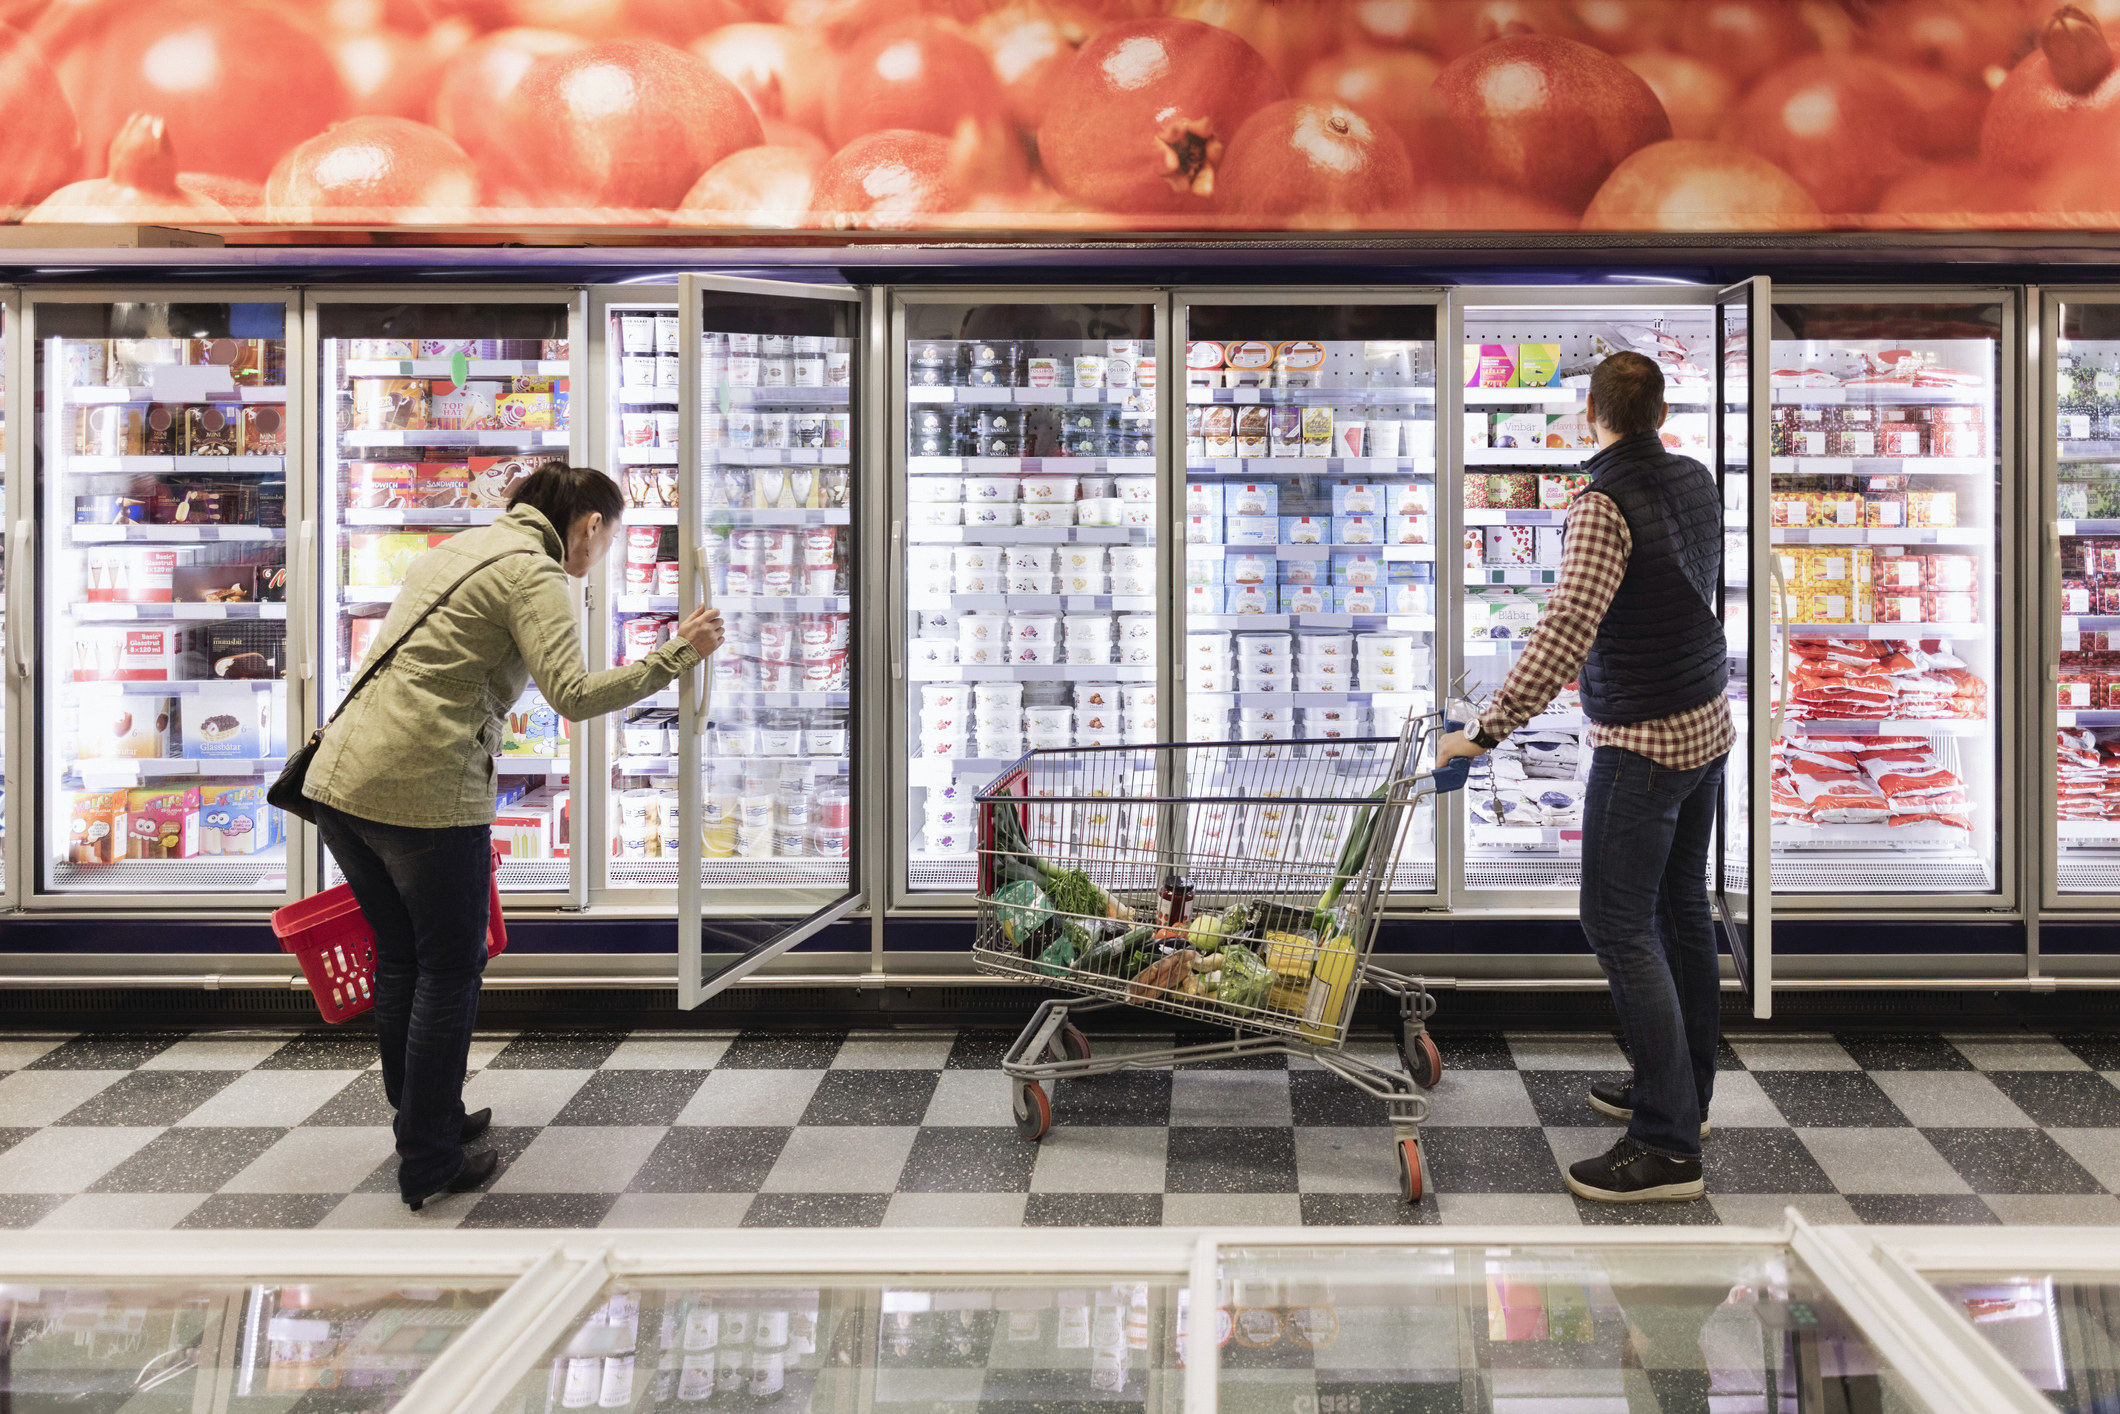 Two people shopping in the refrigerated aisle at the grocery store